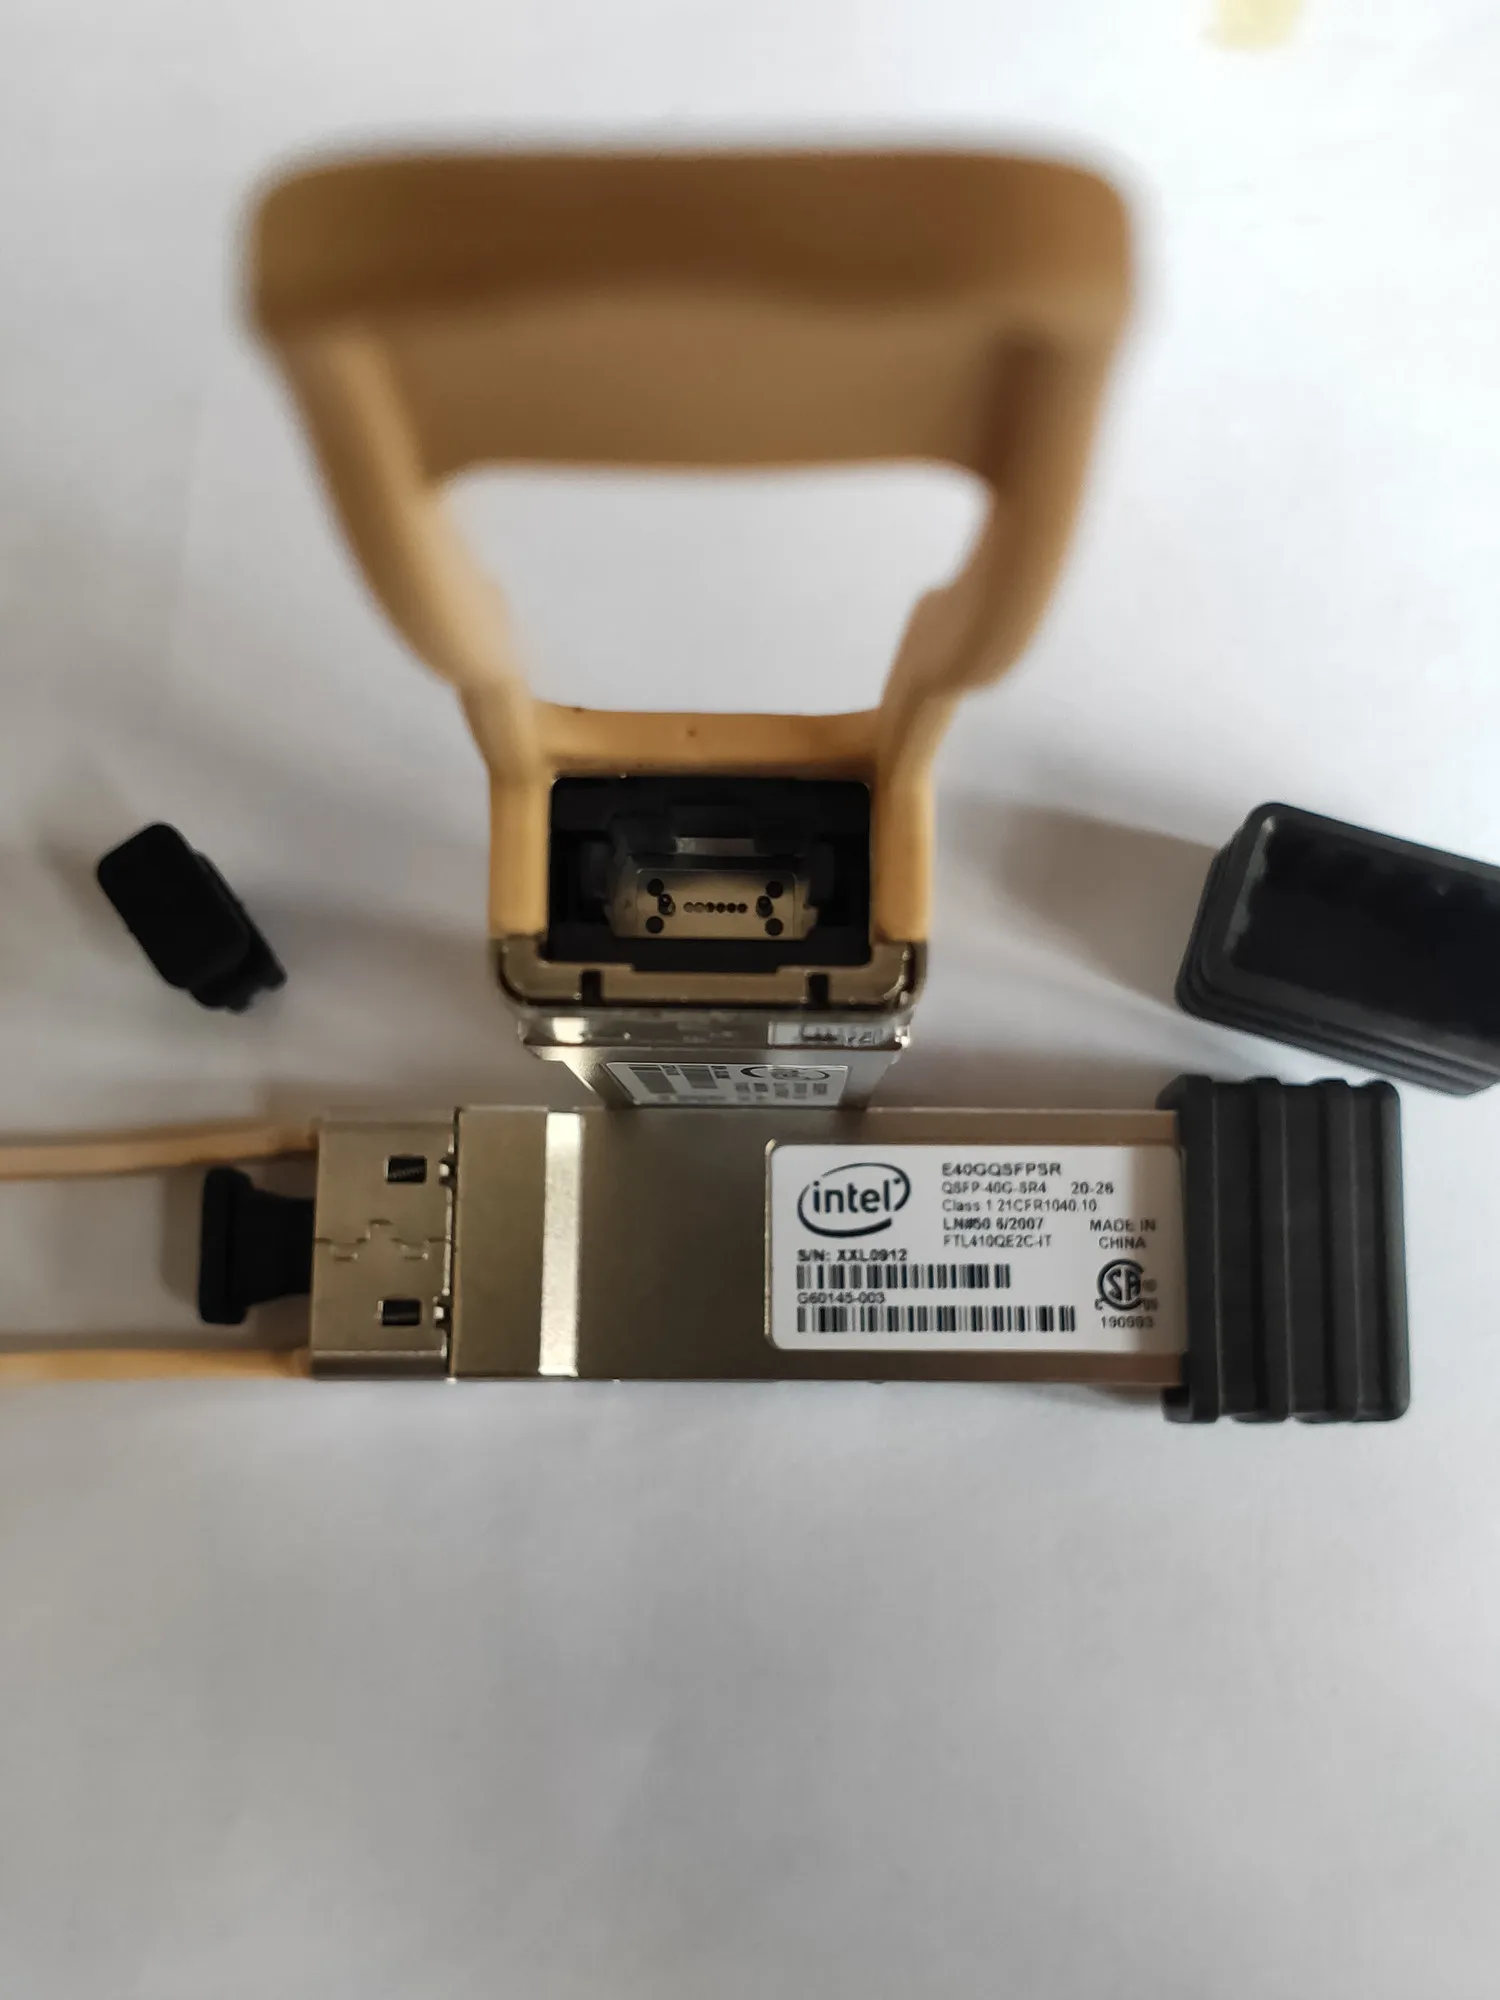 Intel 40G/FTL410QE2C-IT/E40GQSFPSR/QSFP-40G-SR4/40G  850nm 150m MTP/MPO Transceiver intel 40g qsfp Transceiver/40g qsfp switch enlarge